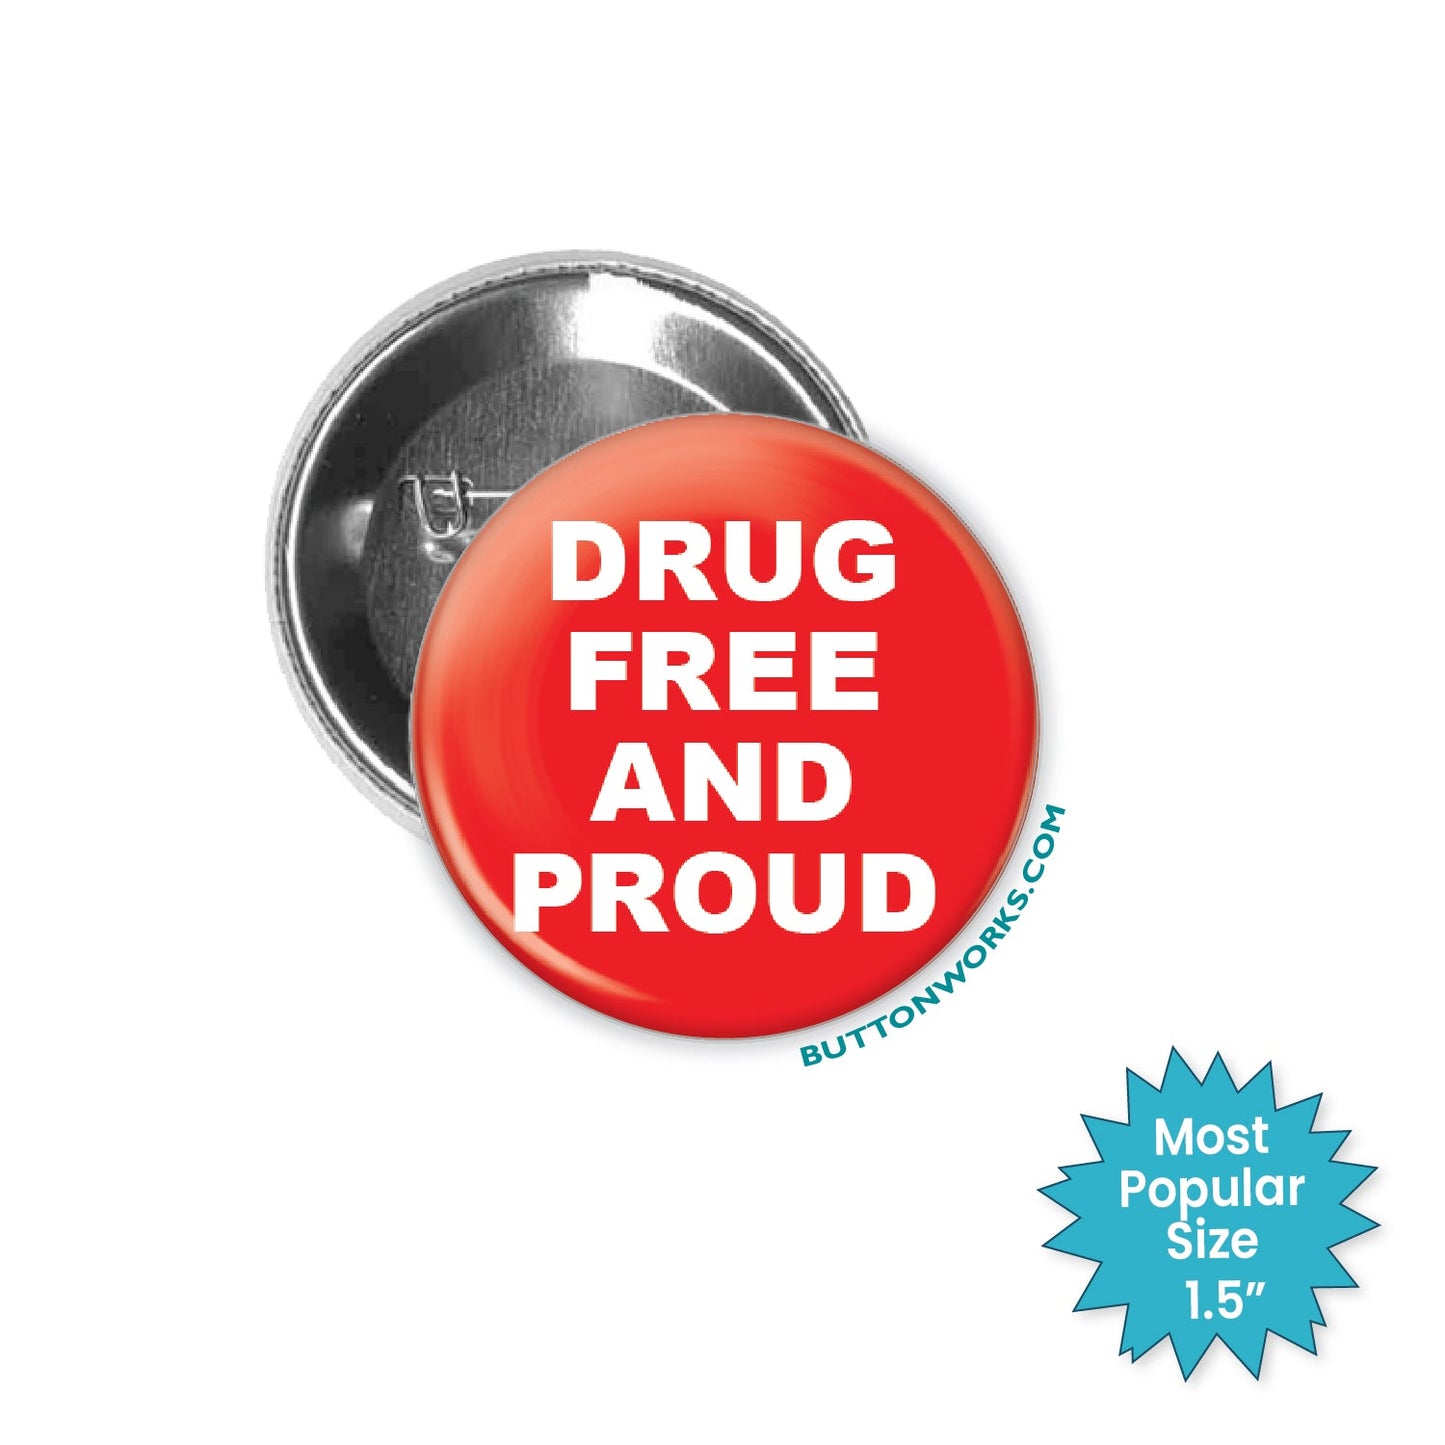 Drug free and proud Pin